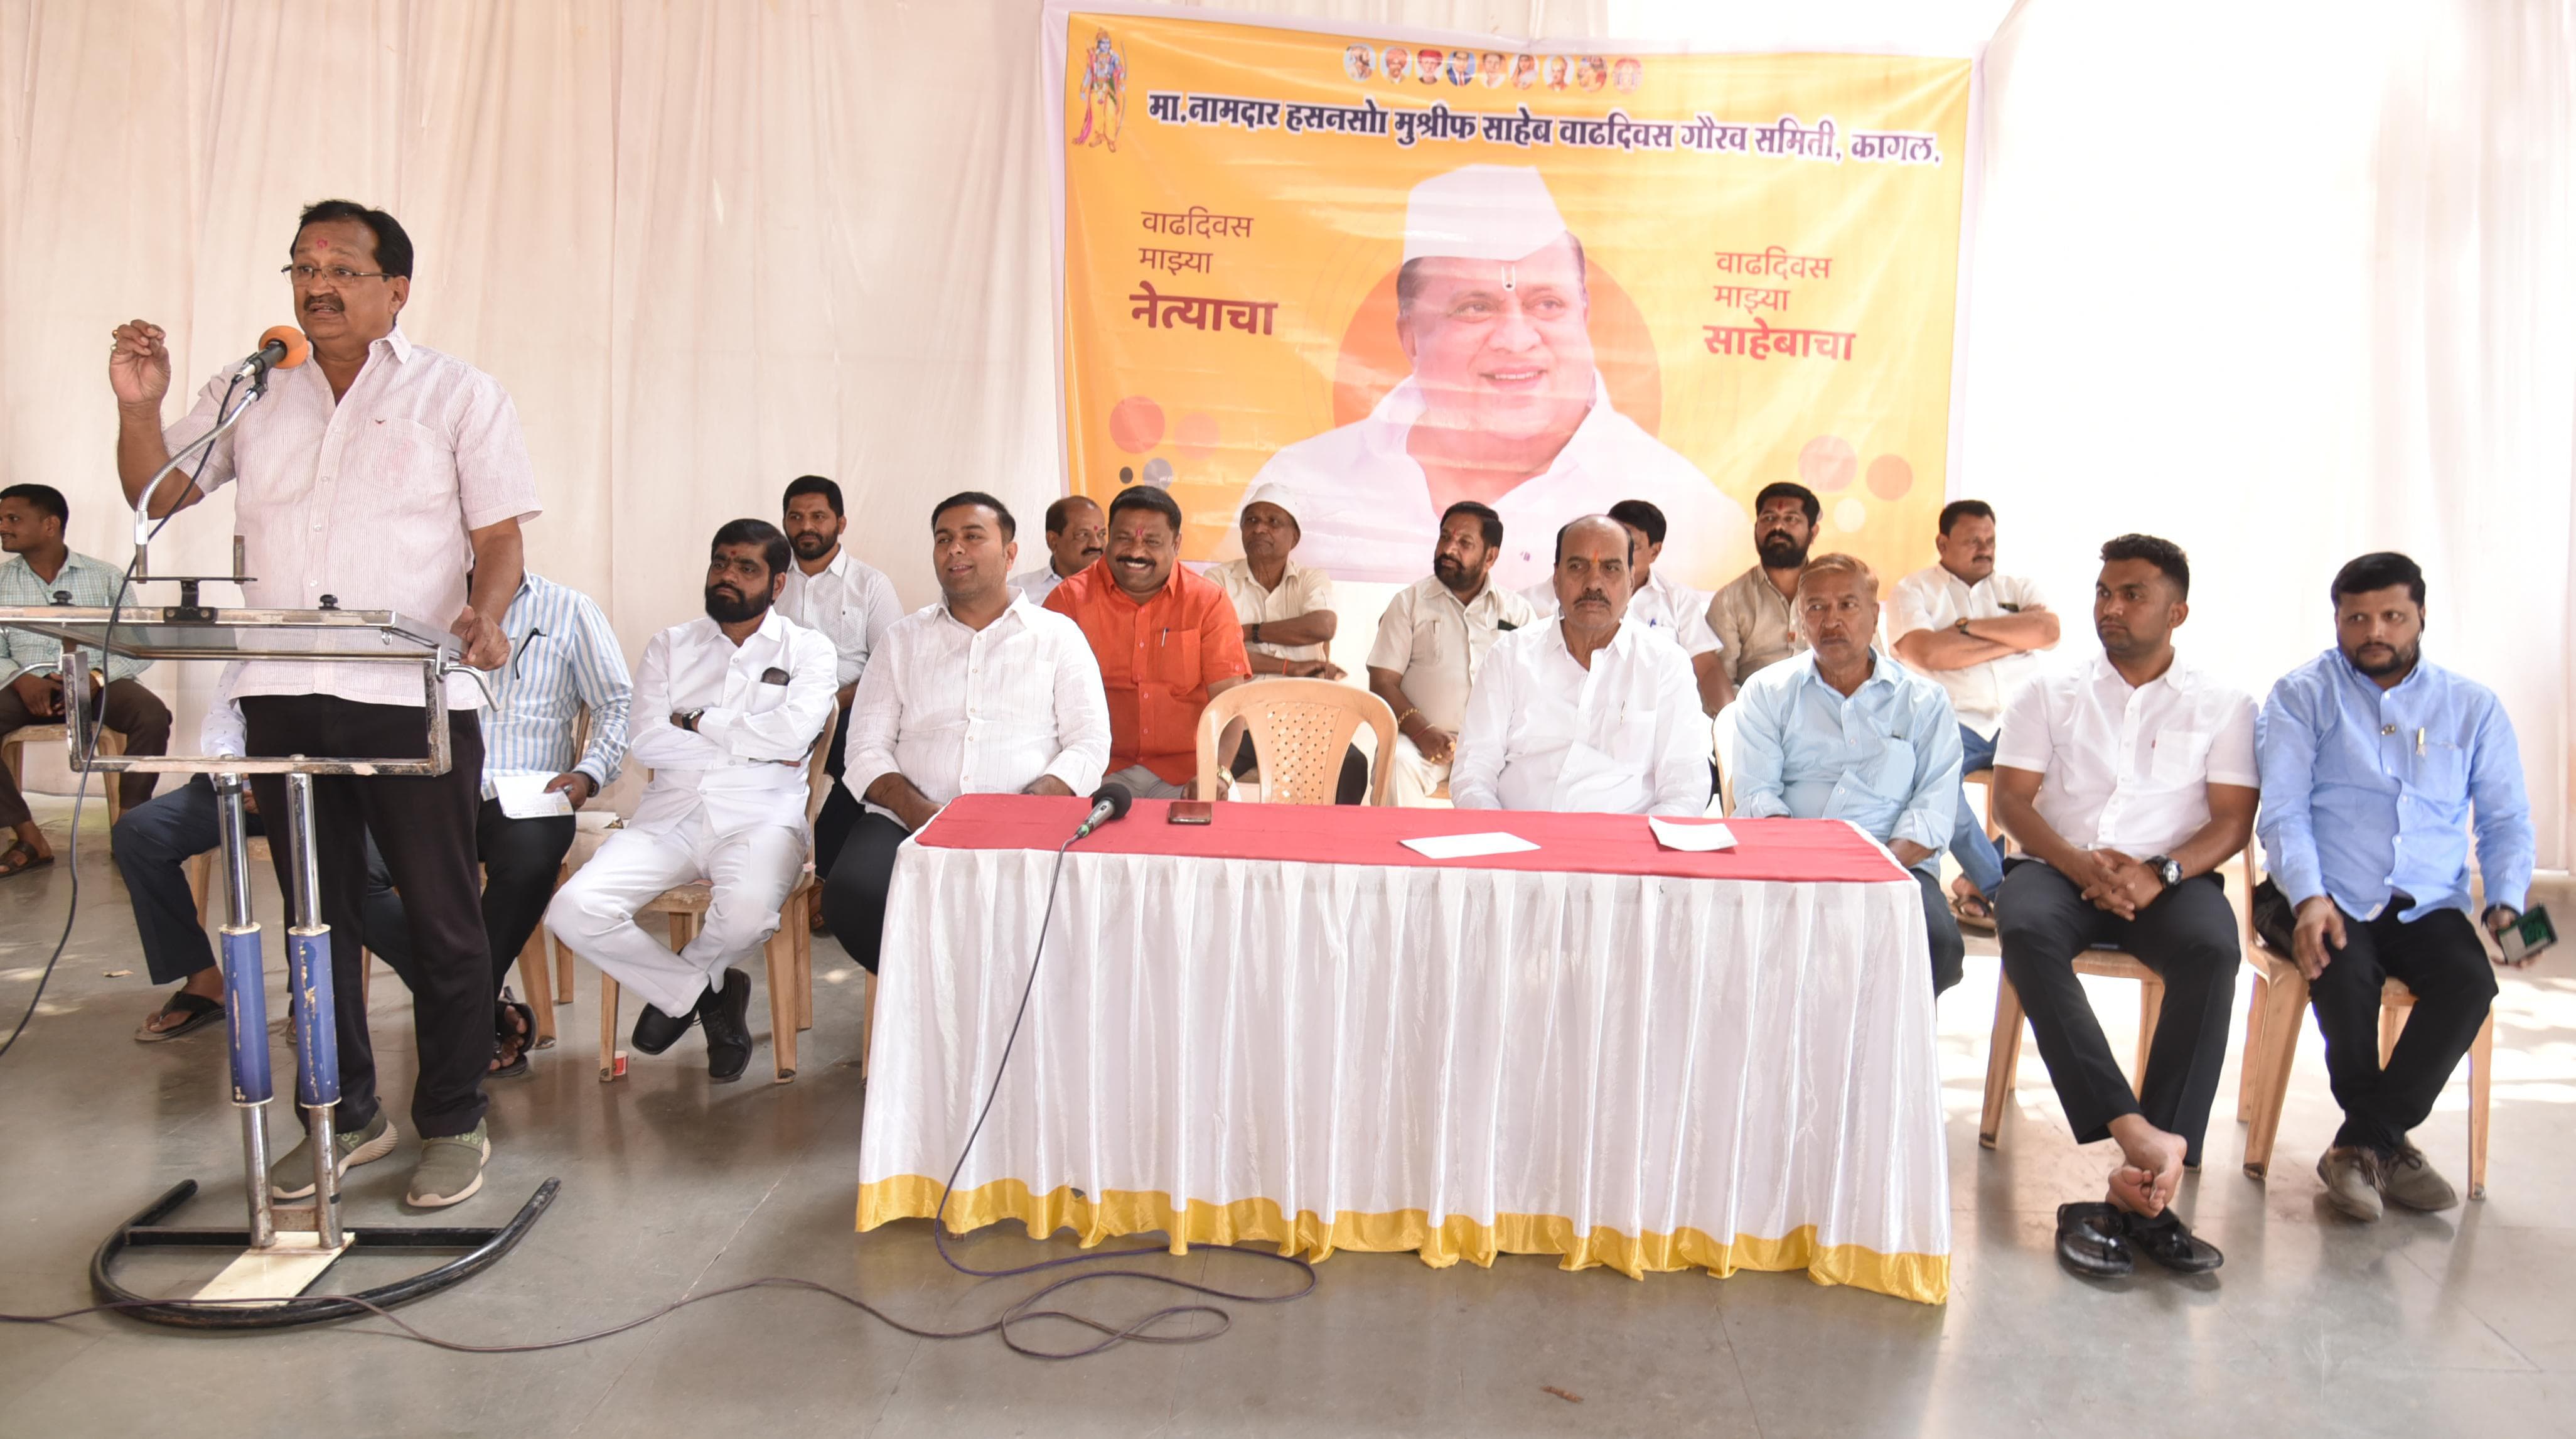 Meeting of office bearers and workers concluded in Kagal